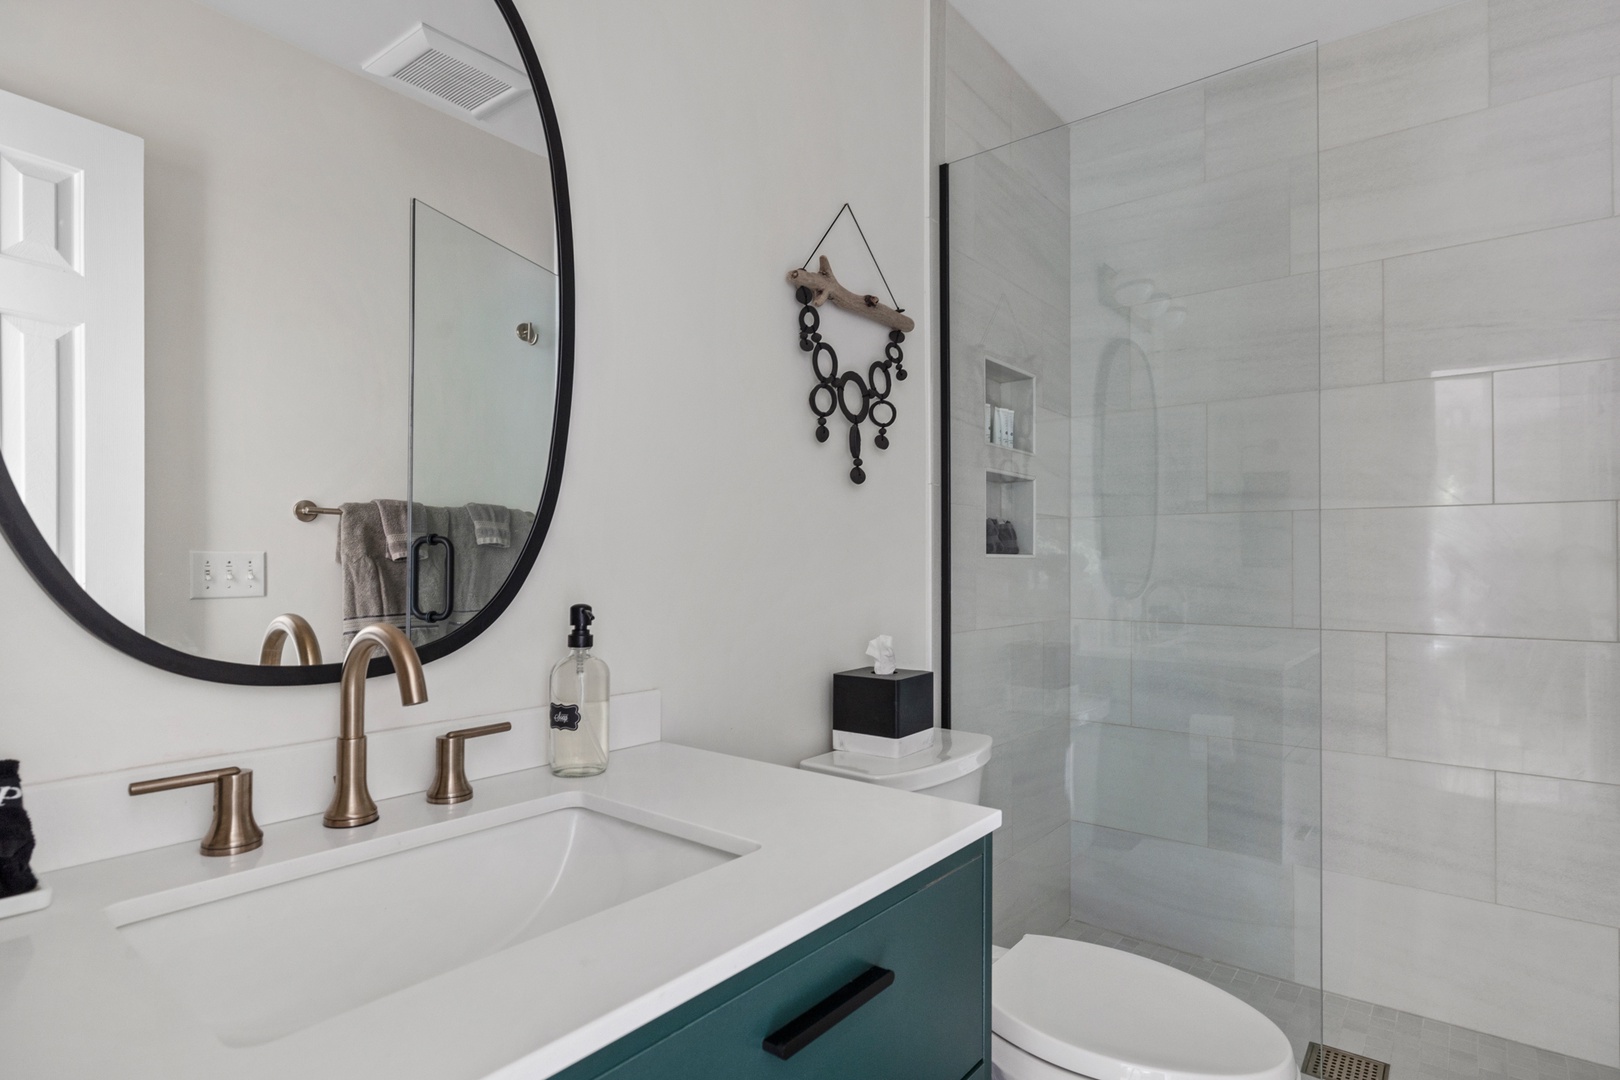 Each bathroom is styled with marble counters & high-end fixtures.